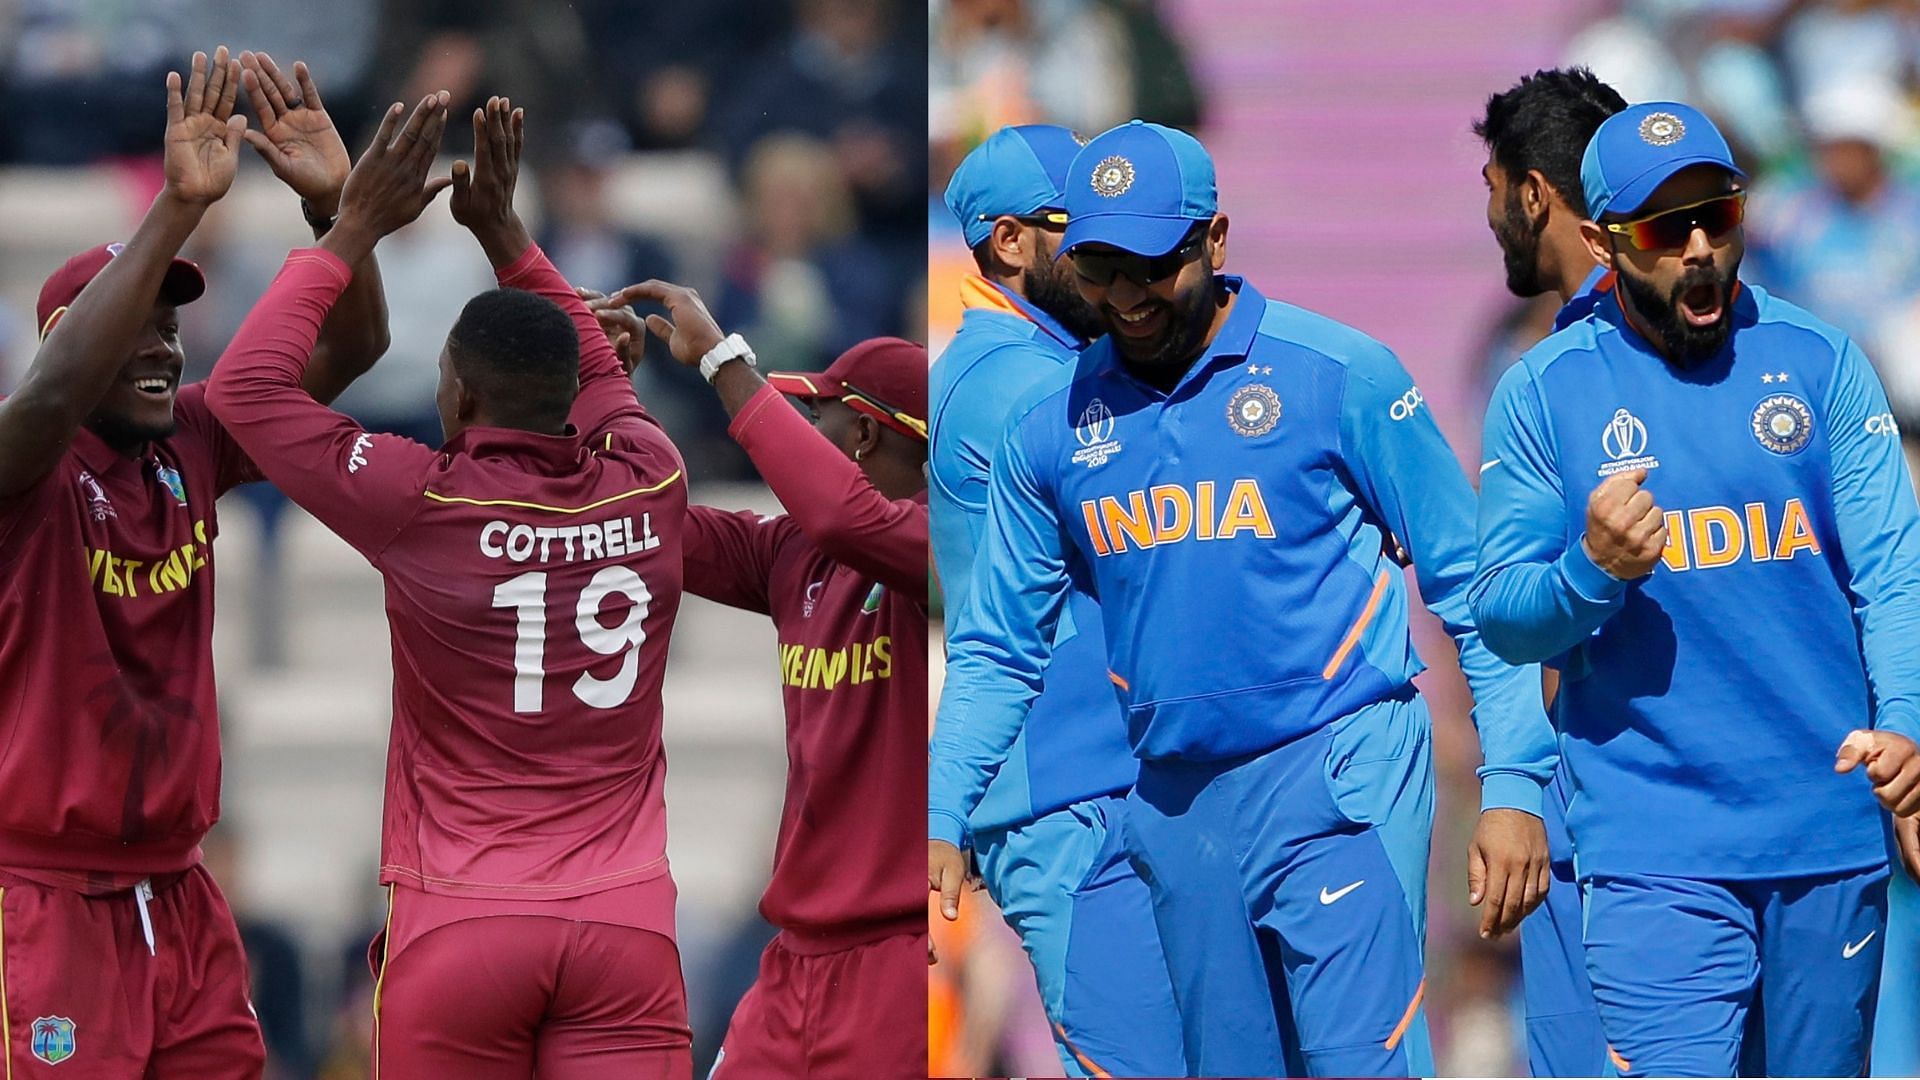 India vs West Indies Live Match Streaming Online